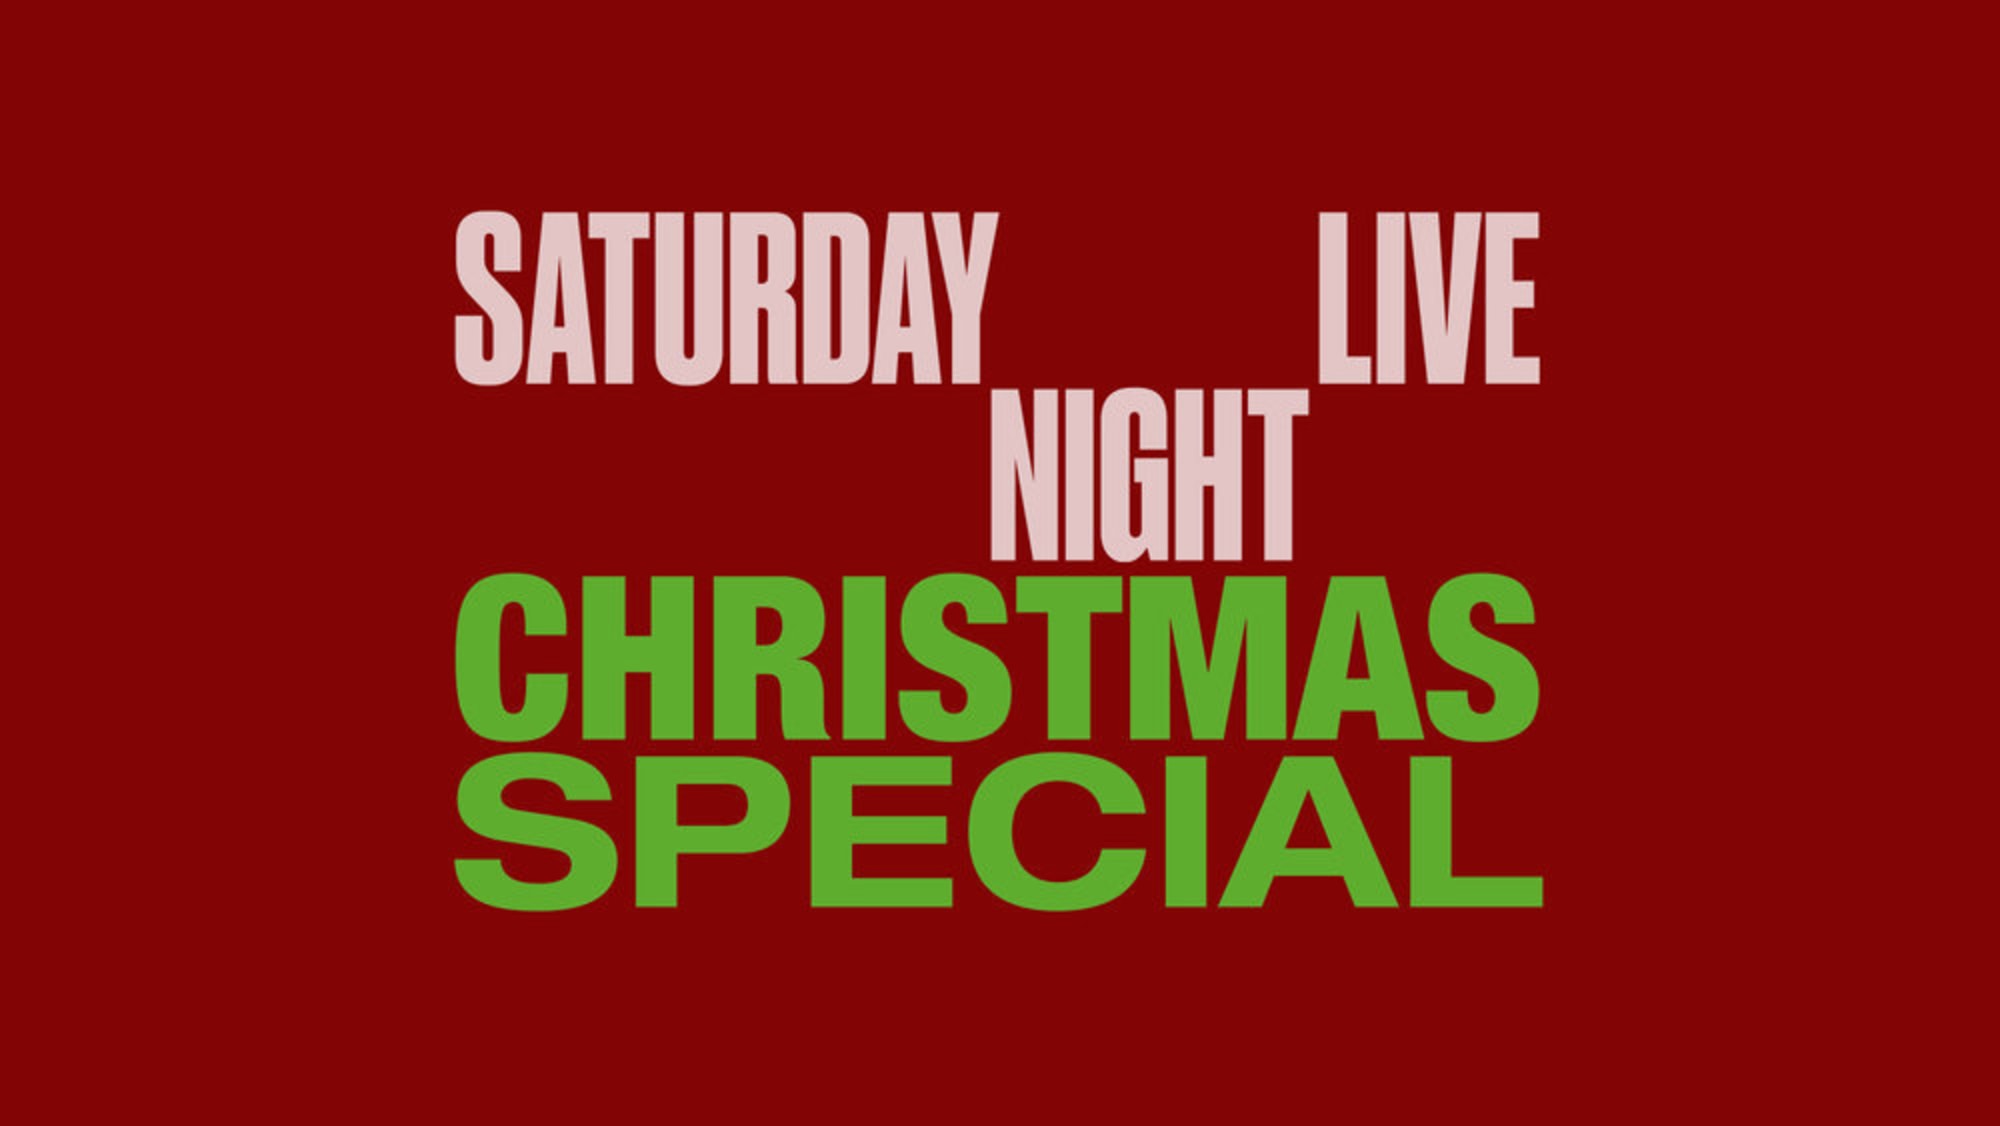 Watch SNL Christmas special online Free live stream Saturday Night Live